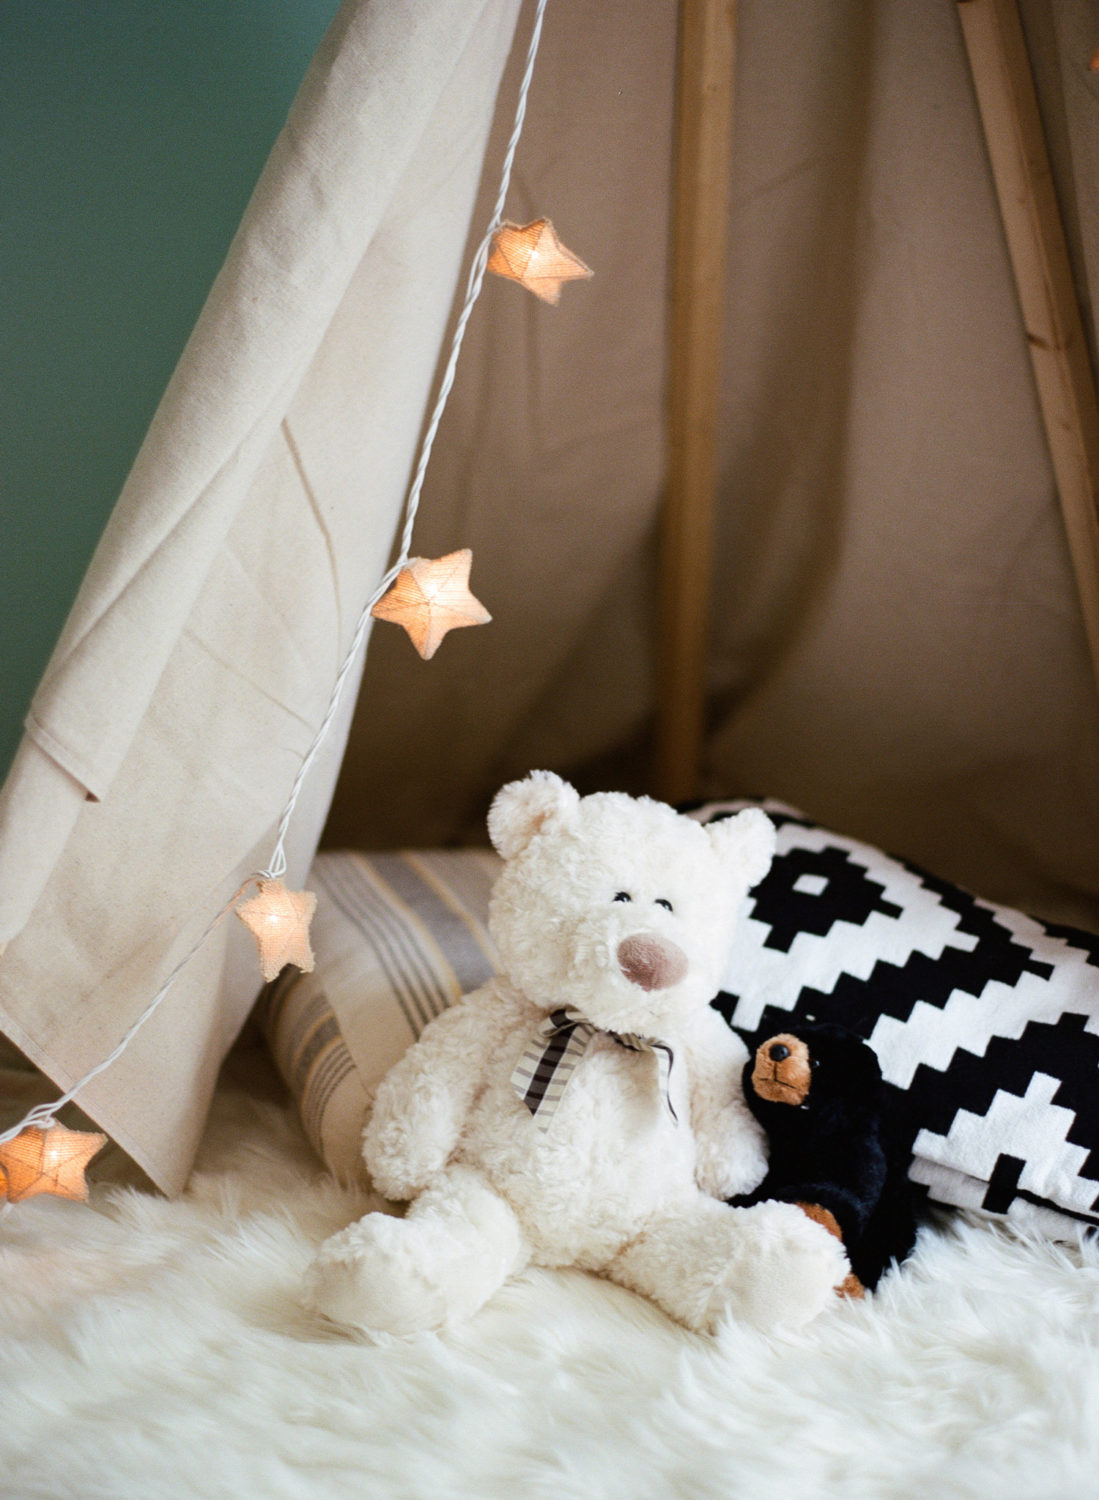 white and black teddy bears sitting on the ground inside a child's play tent with star lights